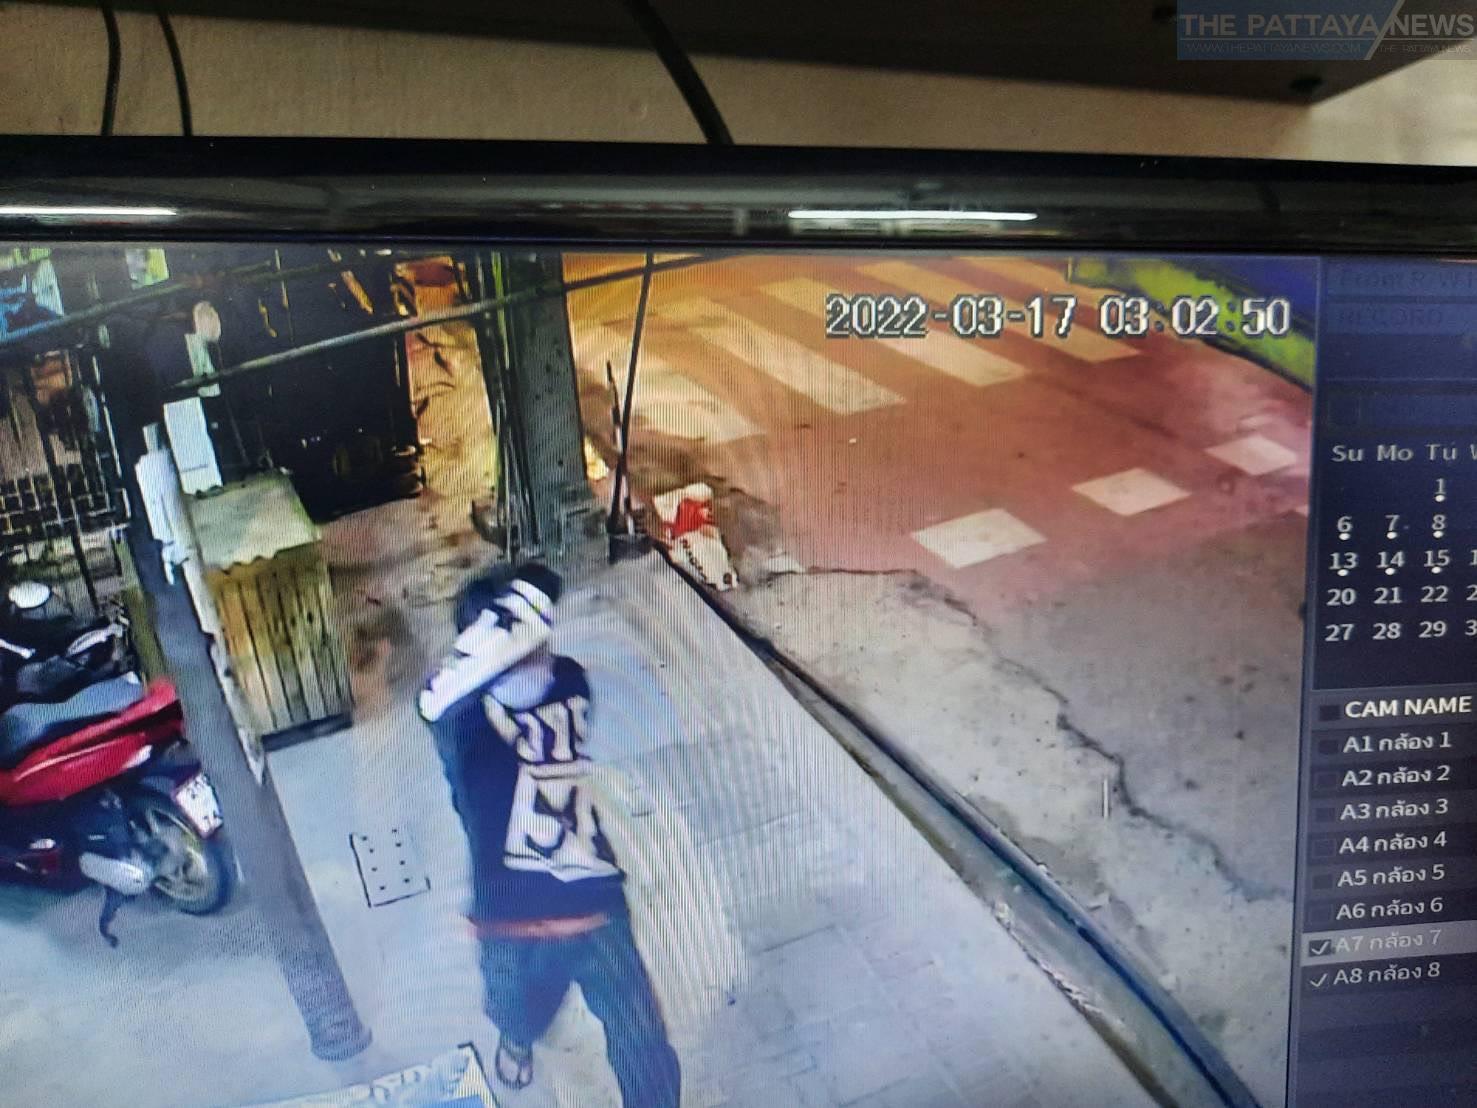 Pattaya Guesthouse Robbed Worker On Night Shift Falls Asleep